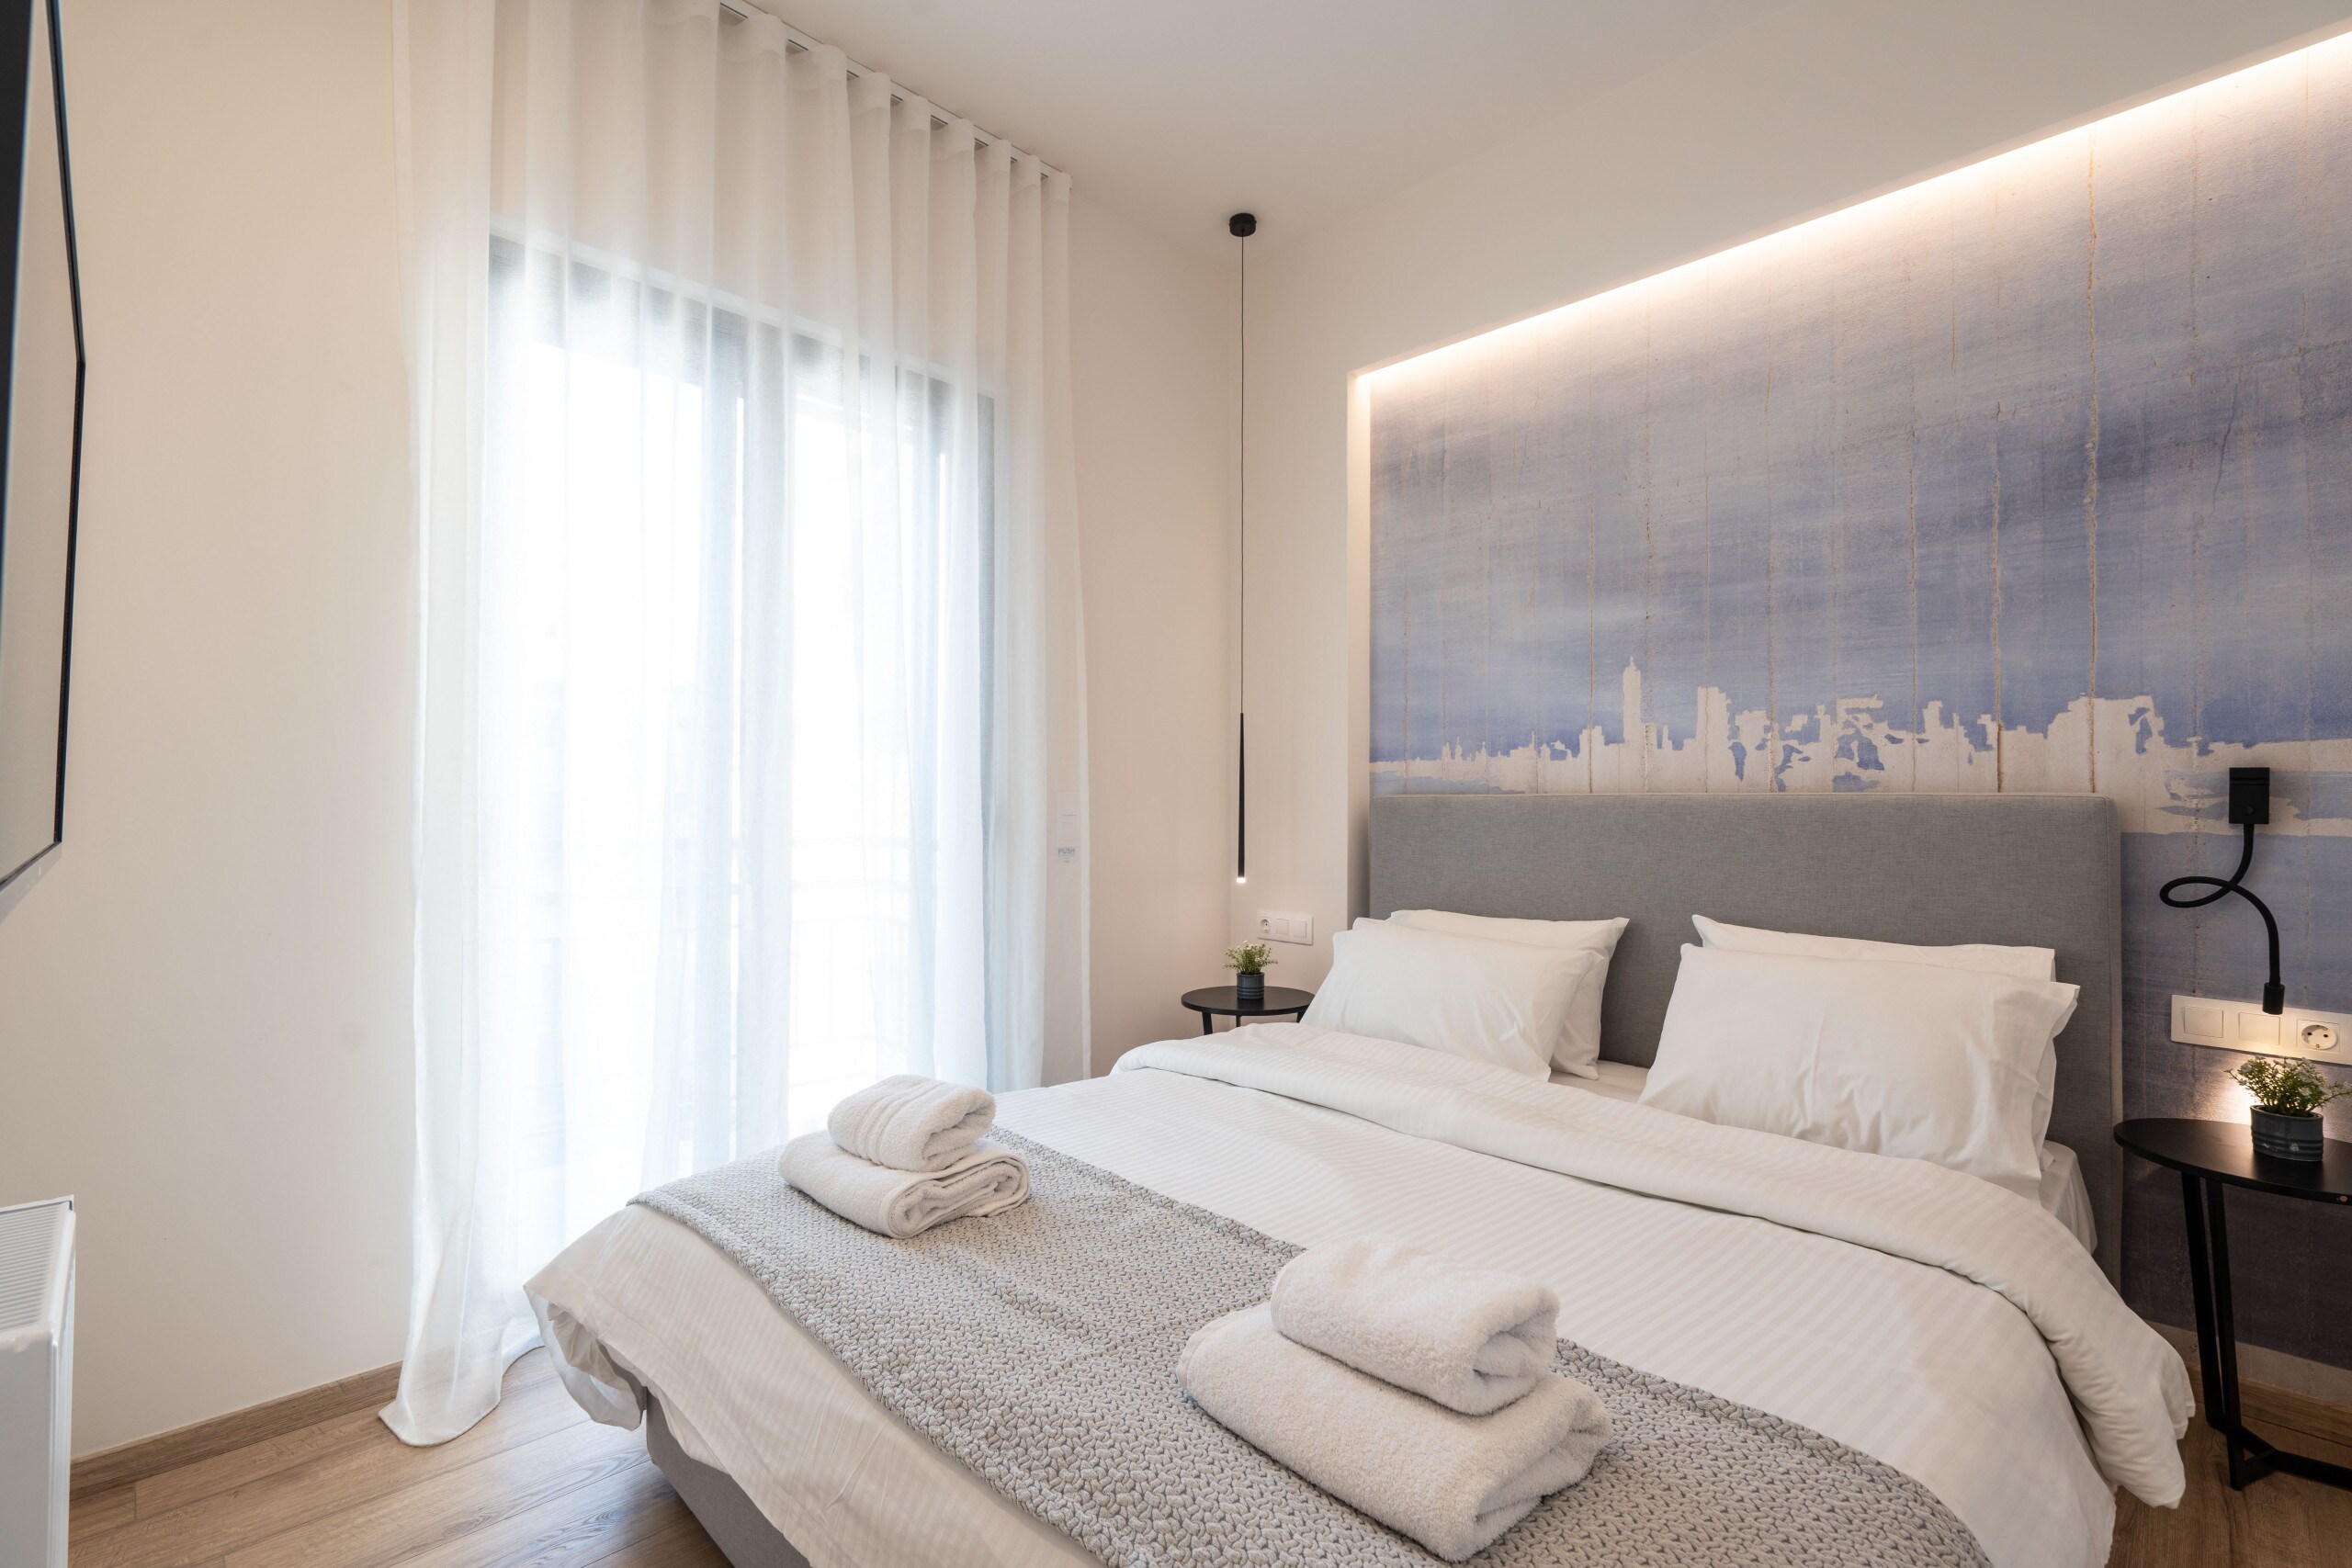 Expect nothing less than premium quality amenities in your bedroom